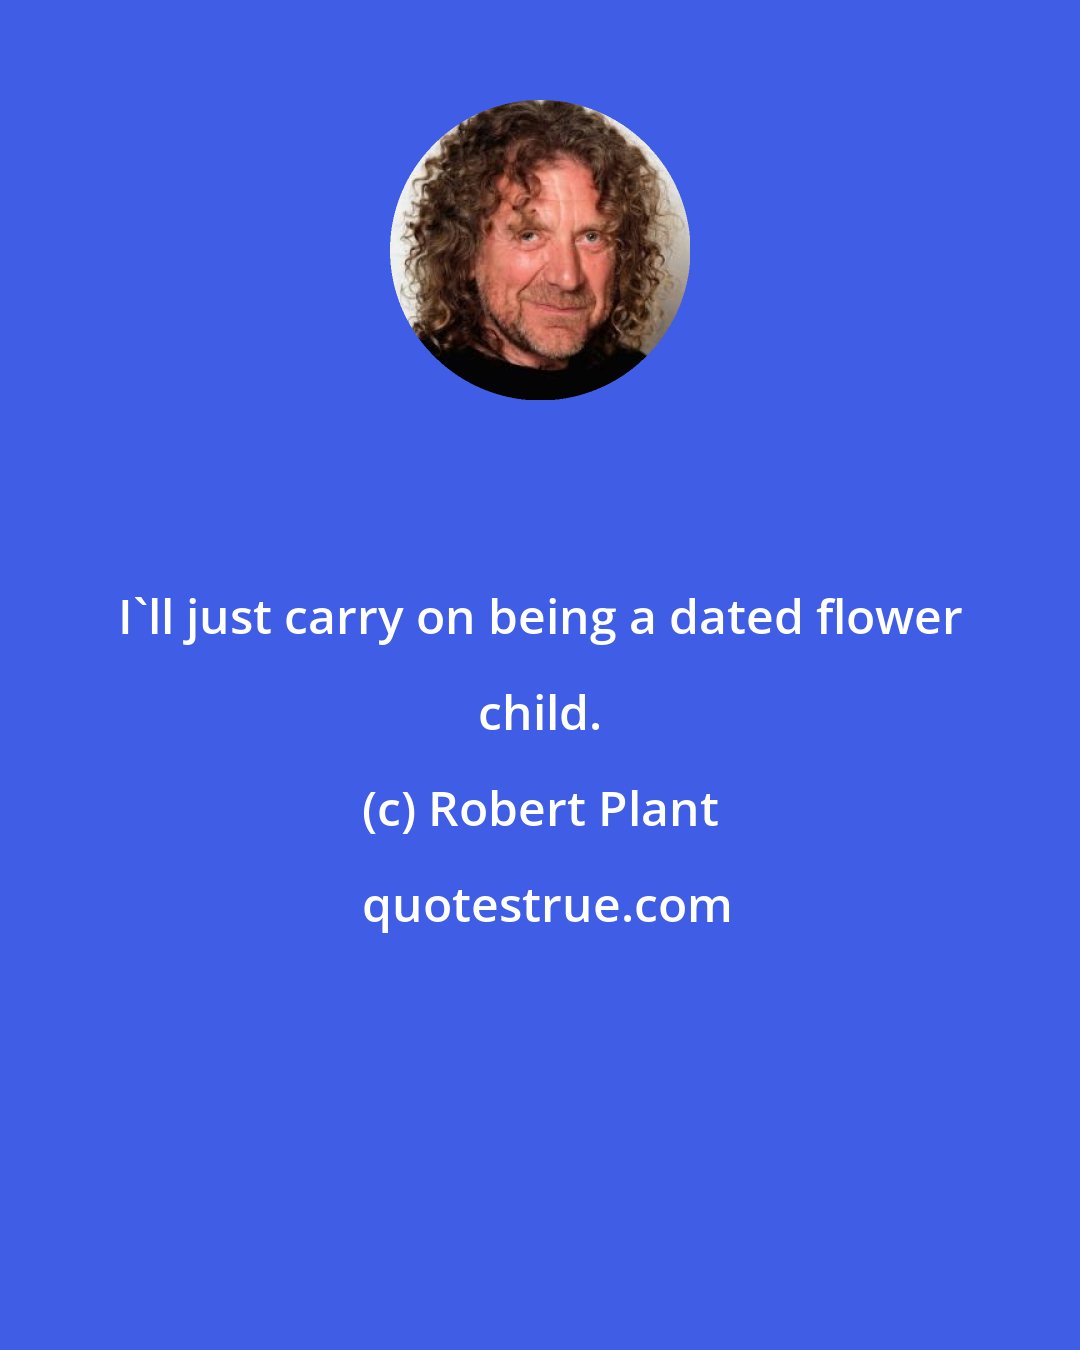 Robert Plant: I'll just carry on being a dated flower child.